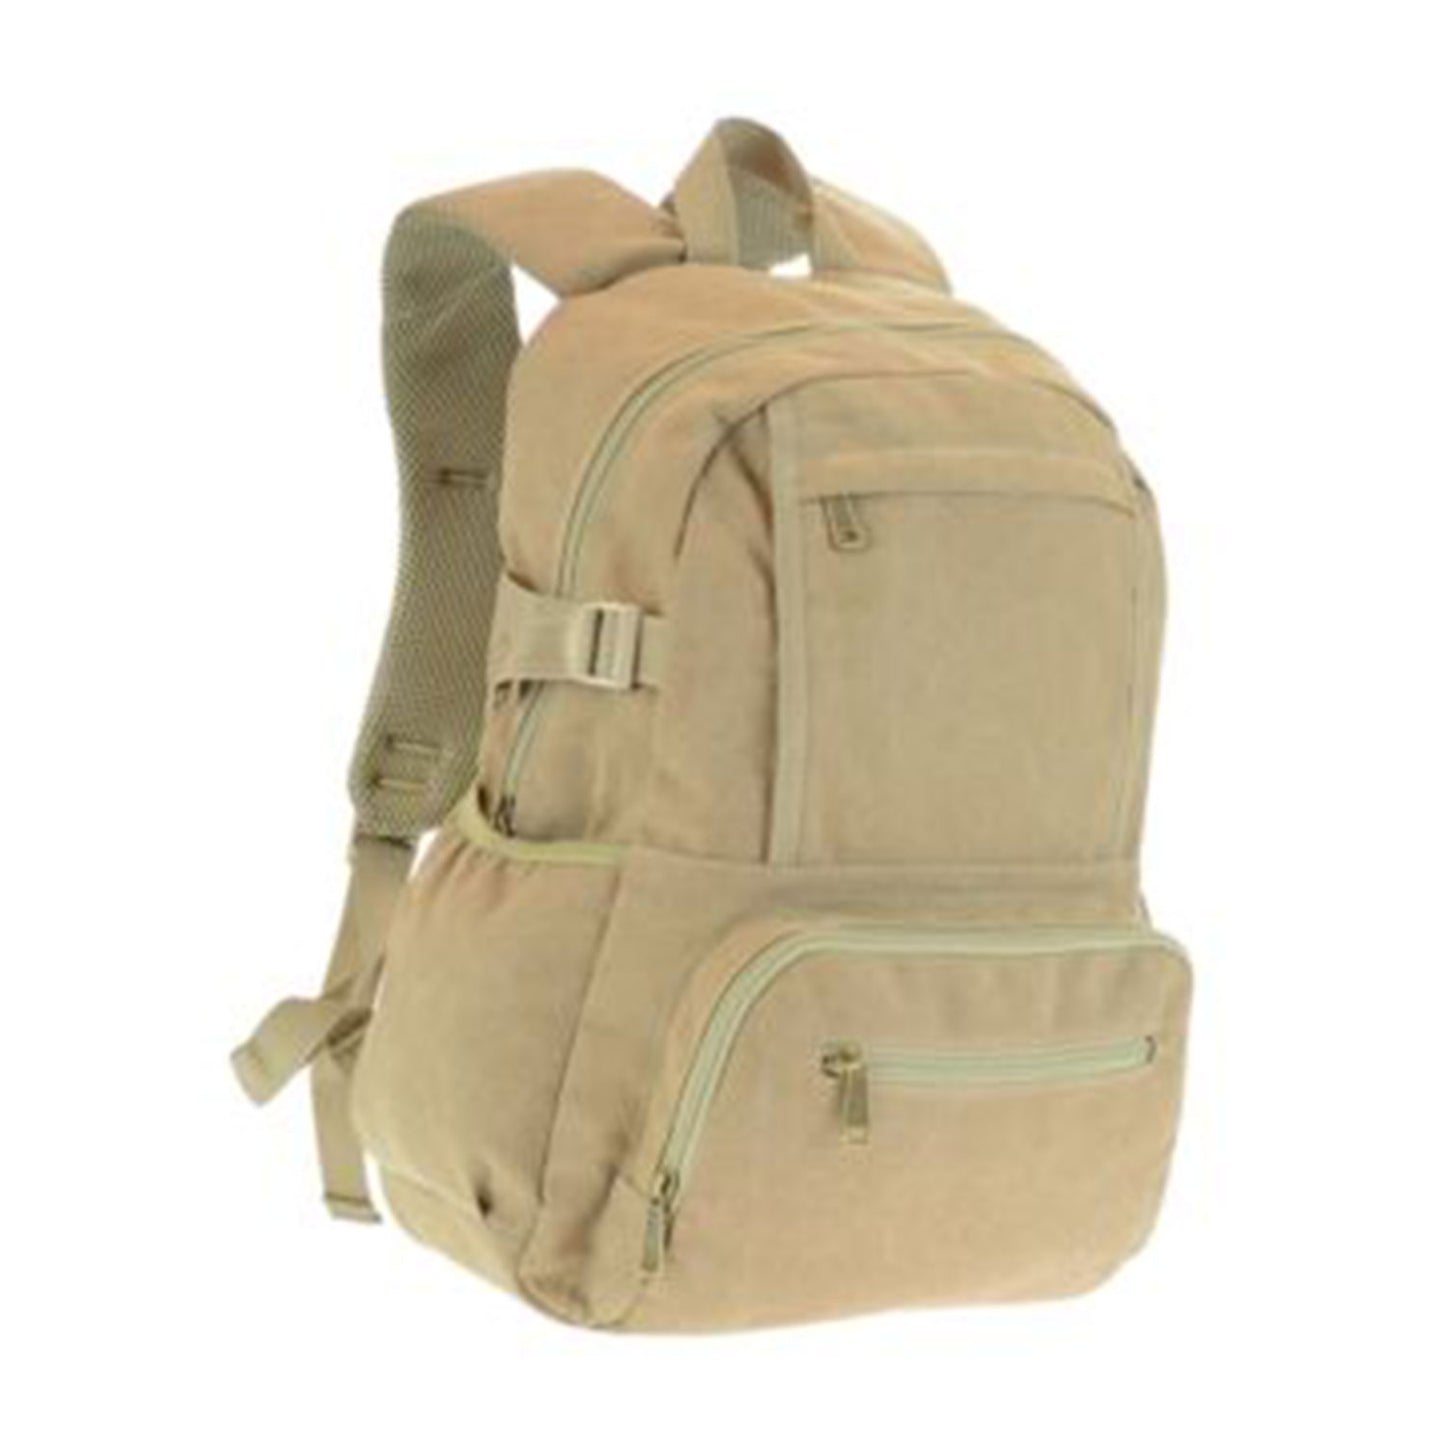  Large Canvas Backpack | Travel, Hiking, Work